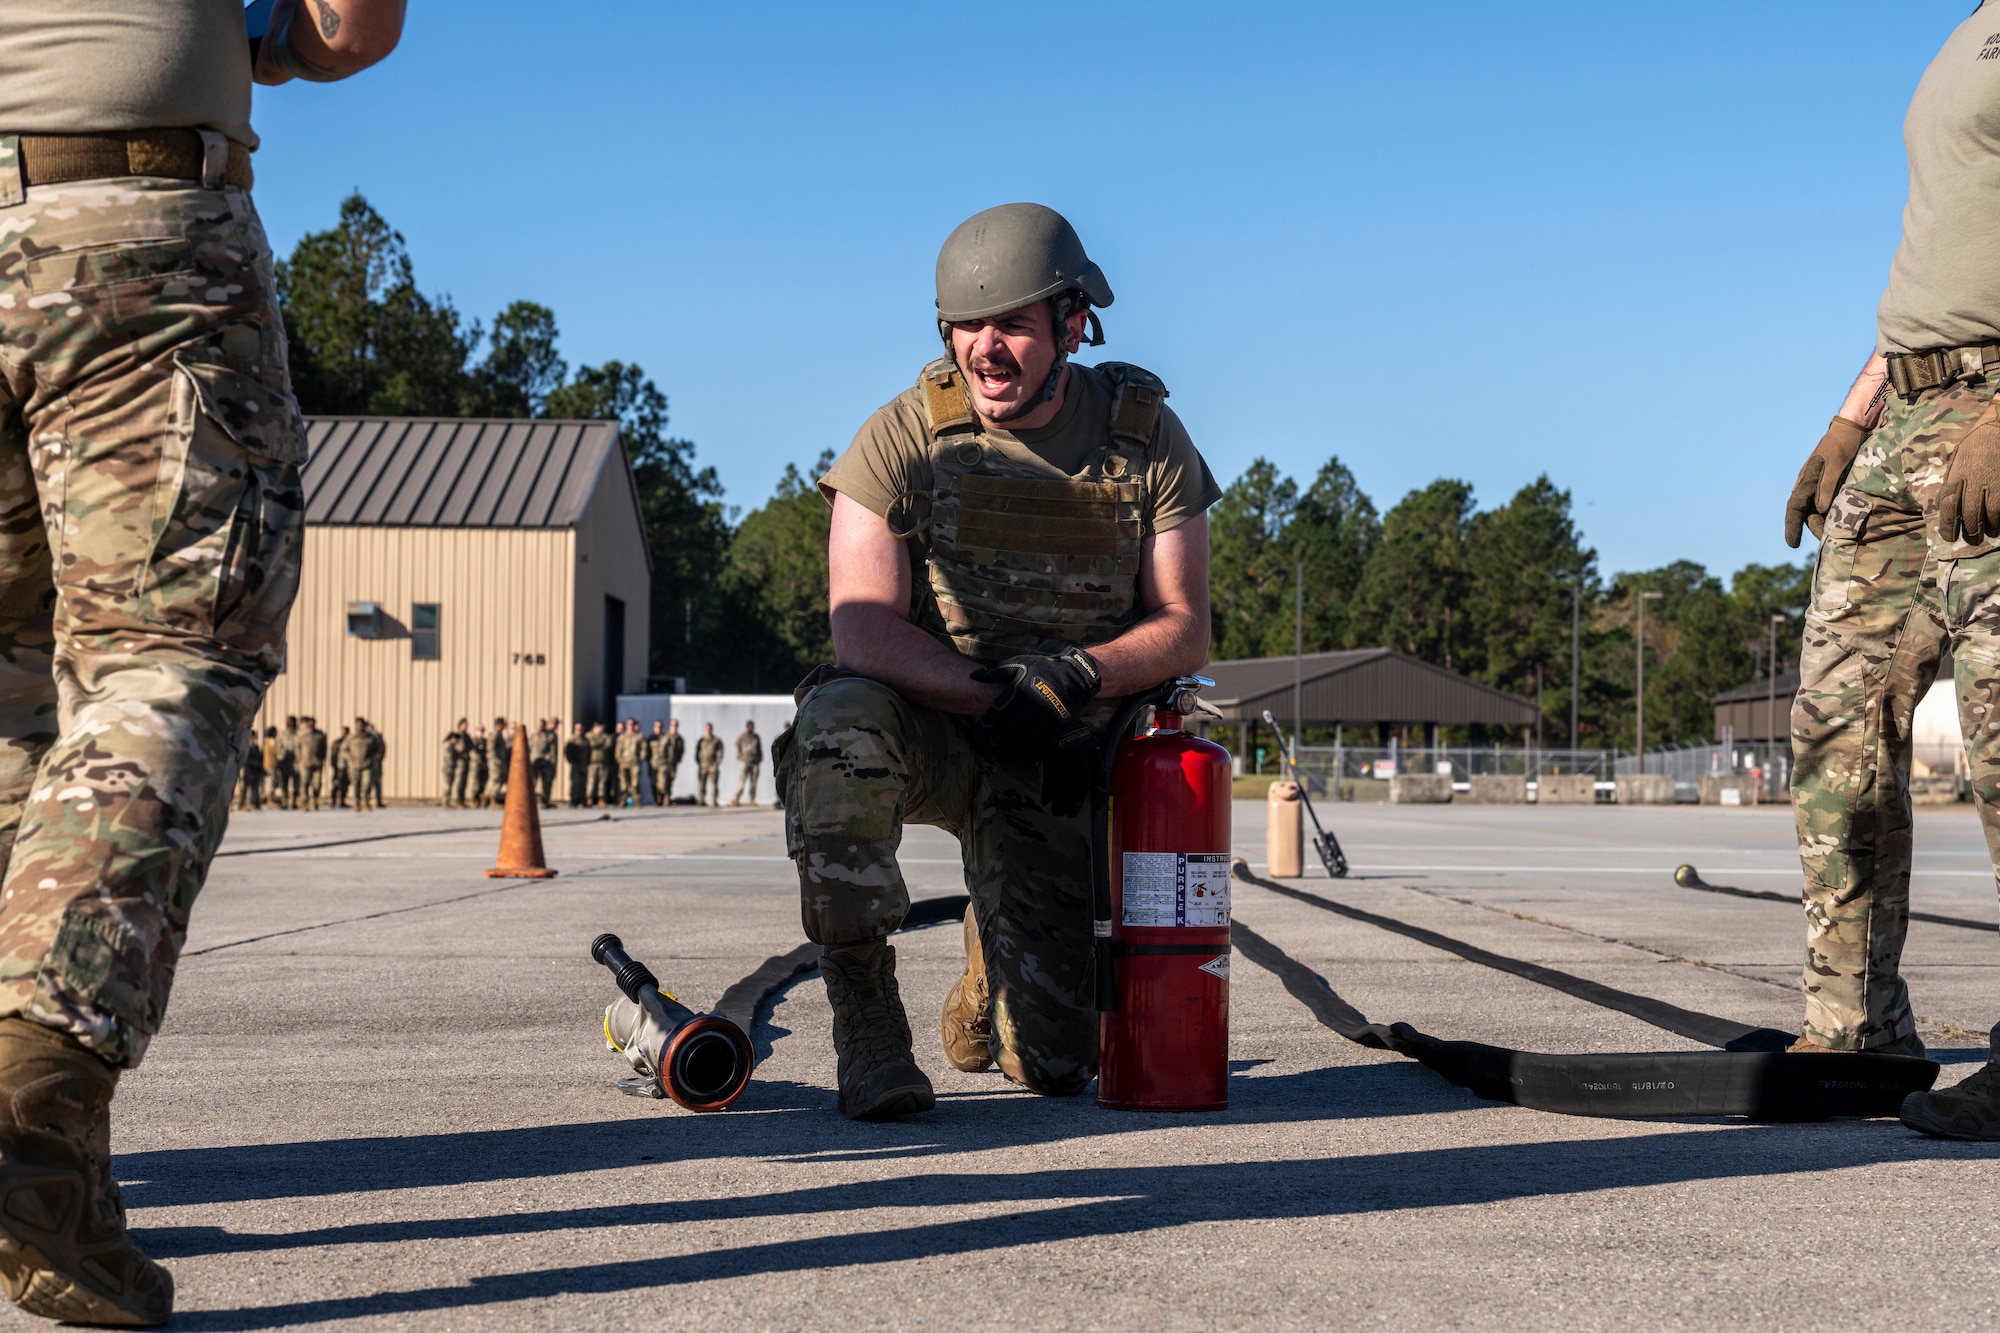 U.S. Air Force Airman 1st Class Broc Harris, 23rd Logistic Readiness Squadron supply, takes a knee during the forward area refueling point team tryout